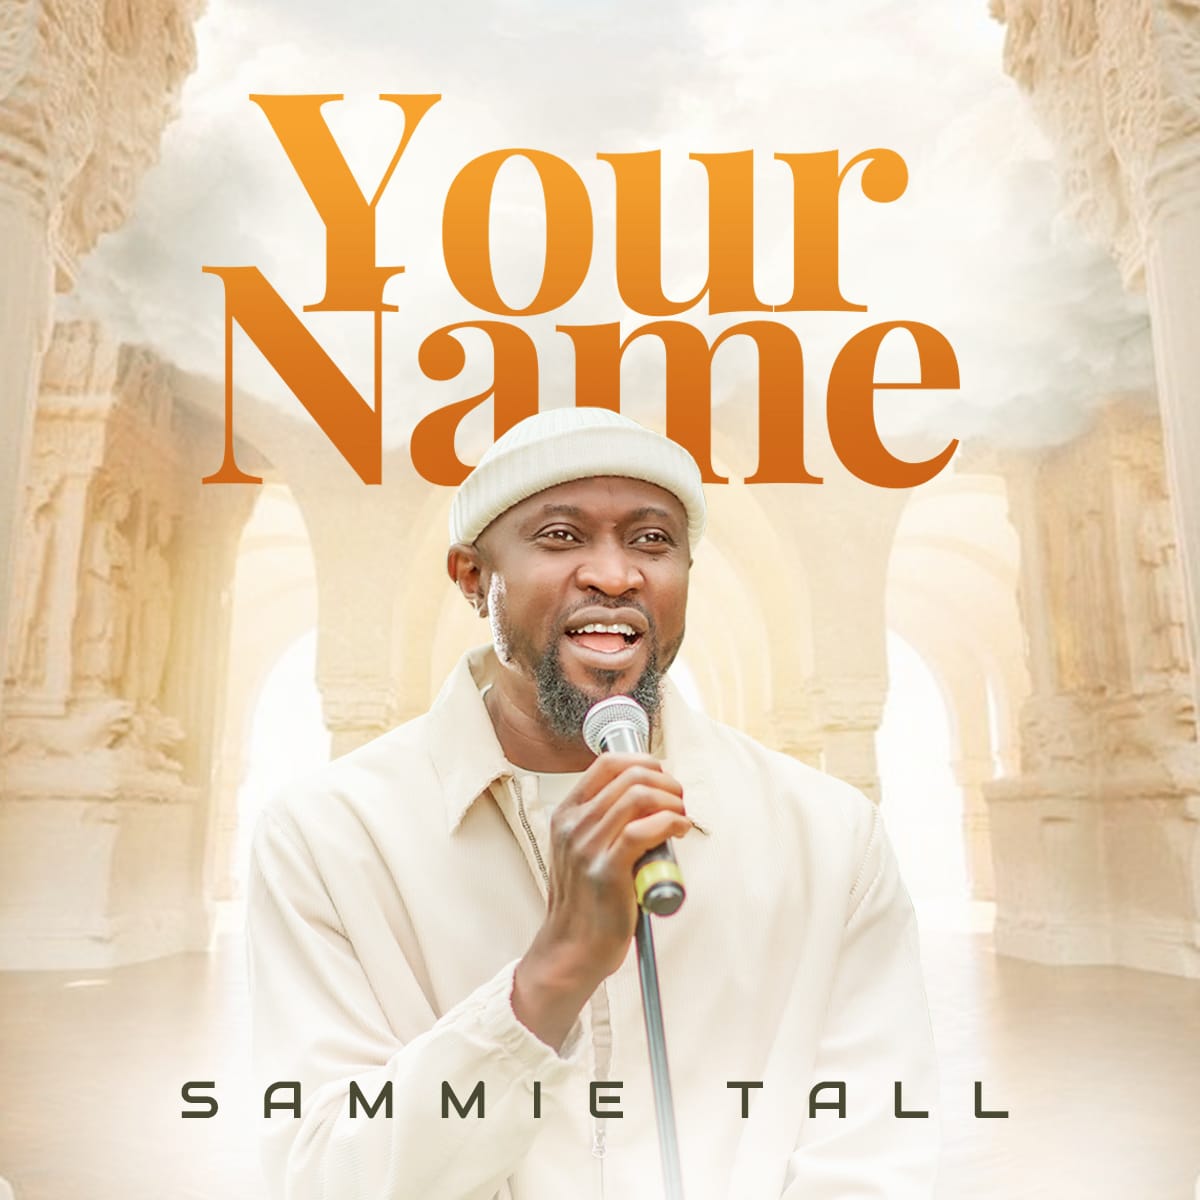 Sammie Tall - Your Name